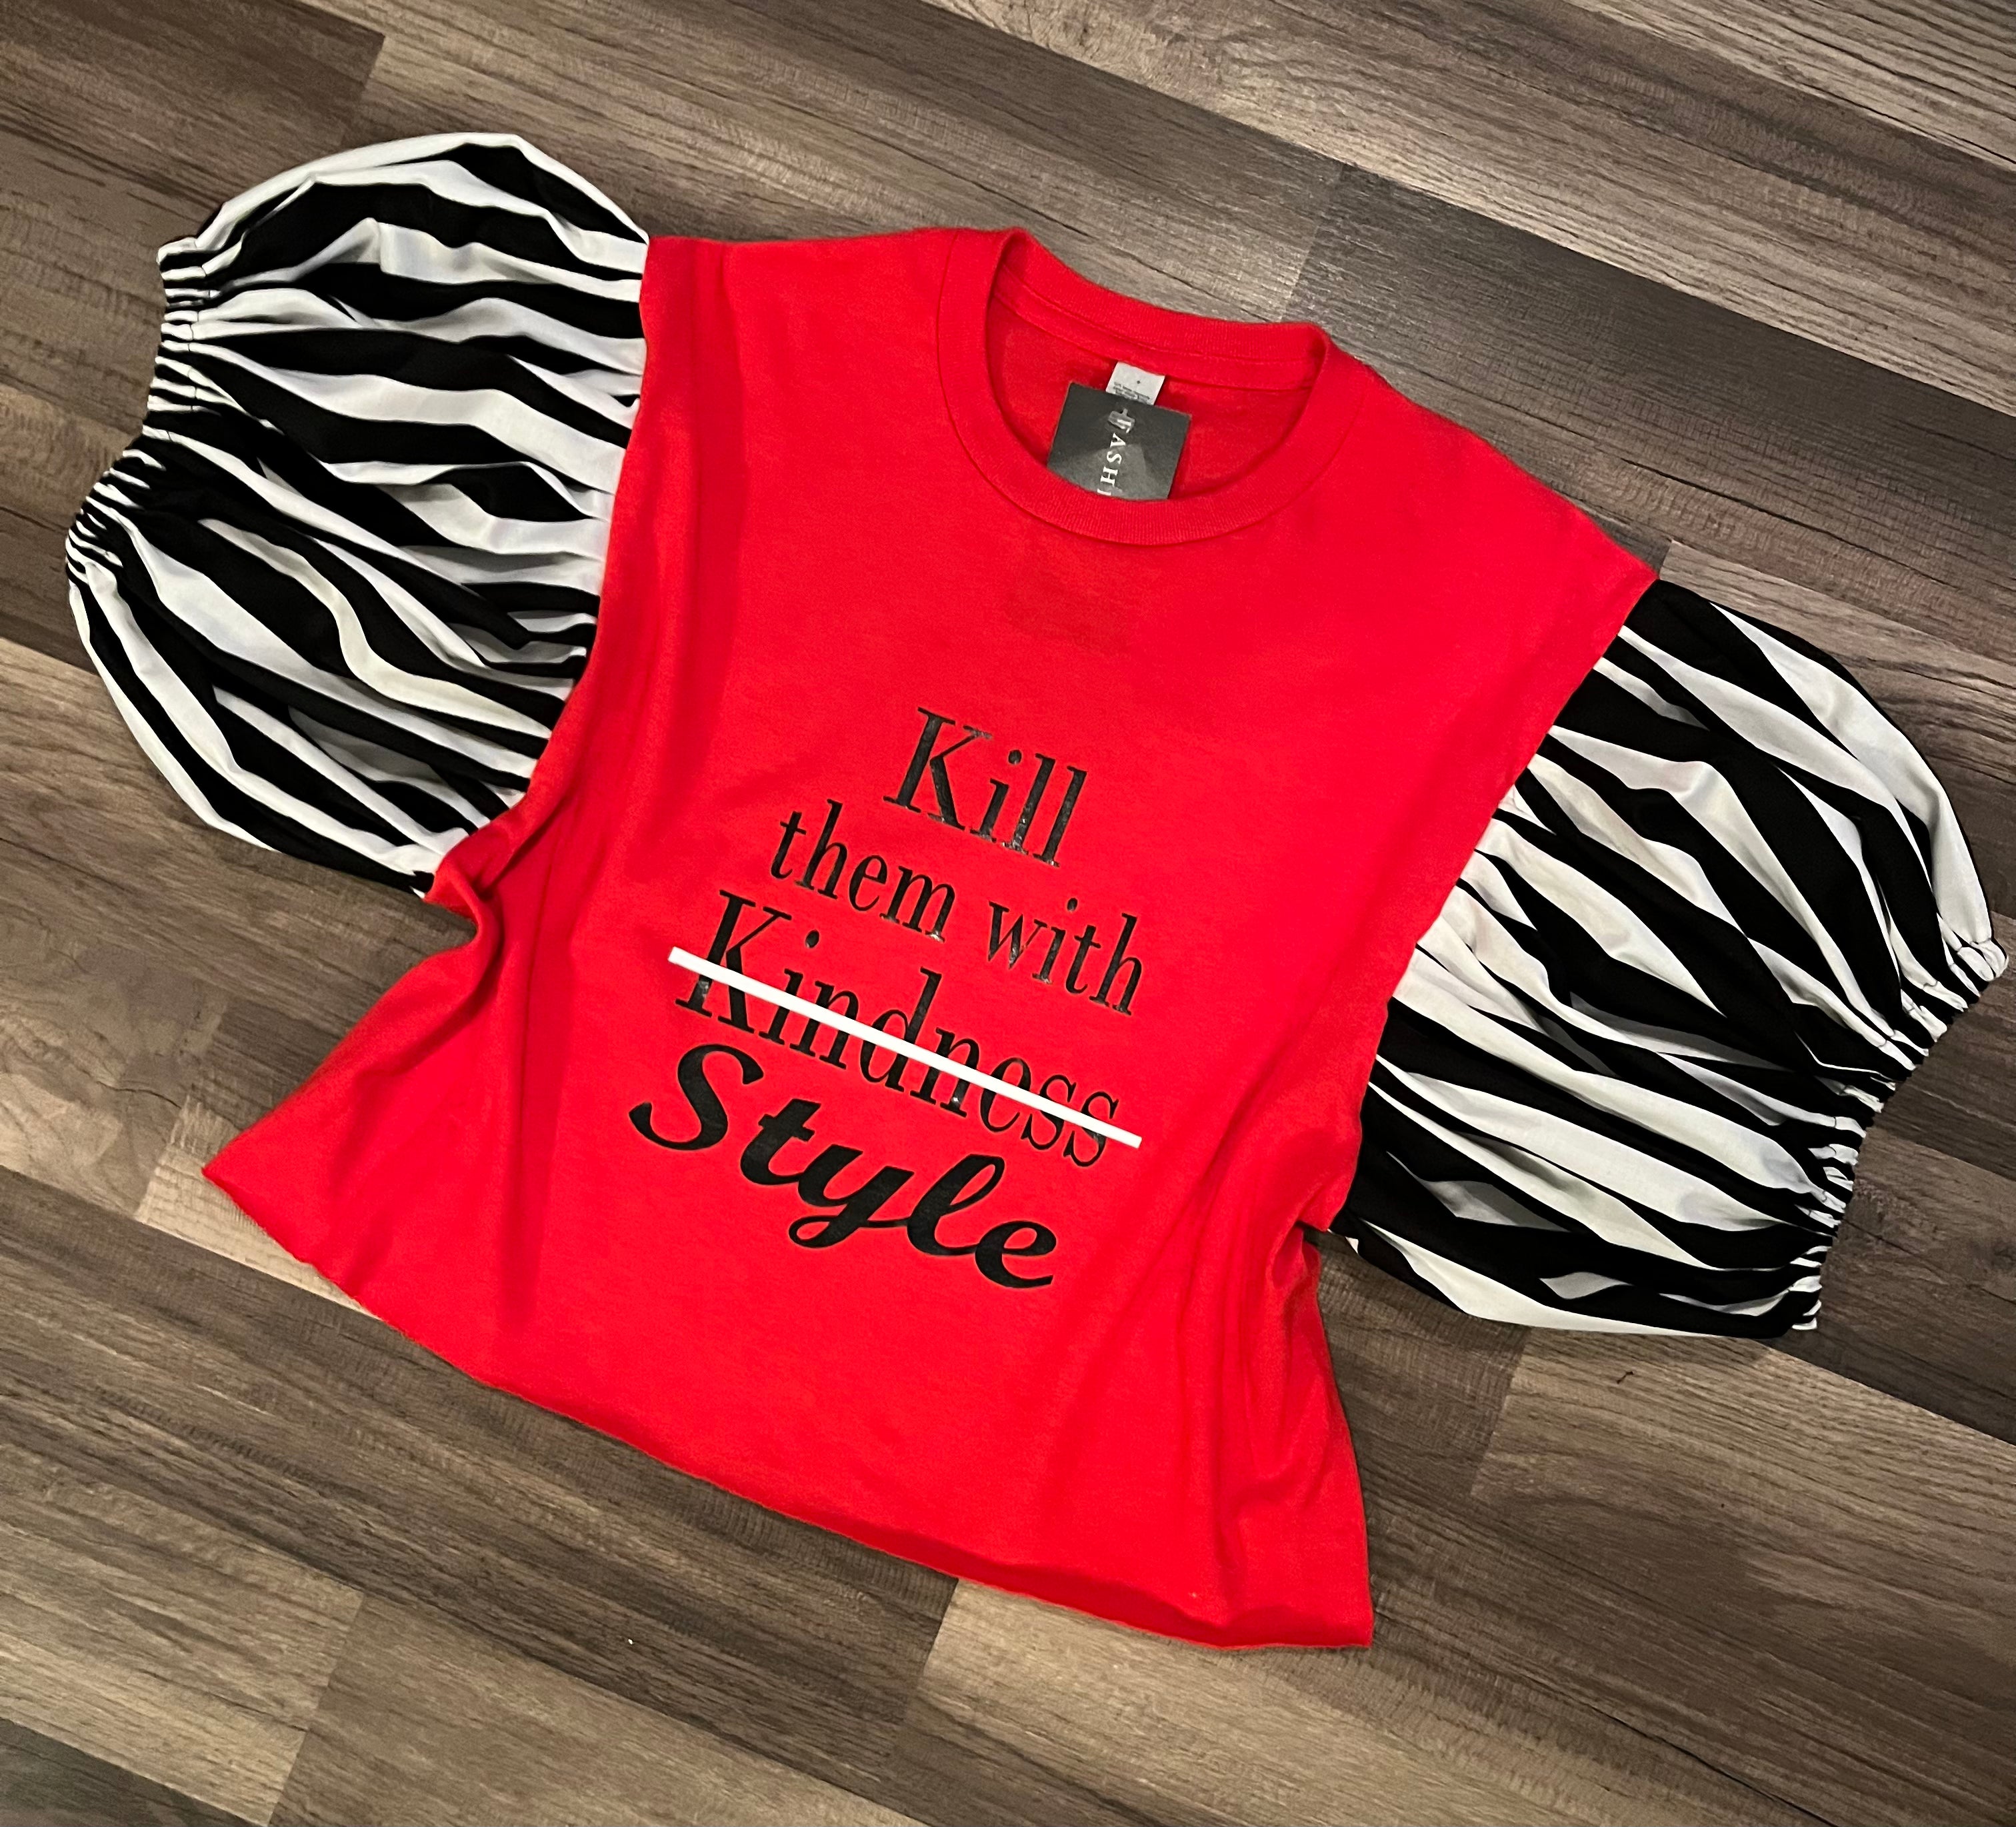 Kill ‘em with Style top.